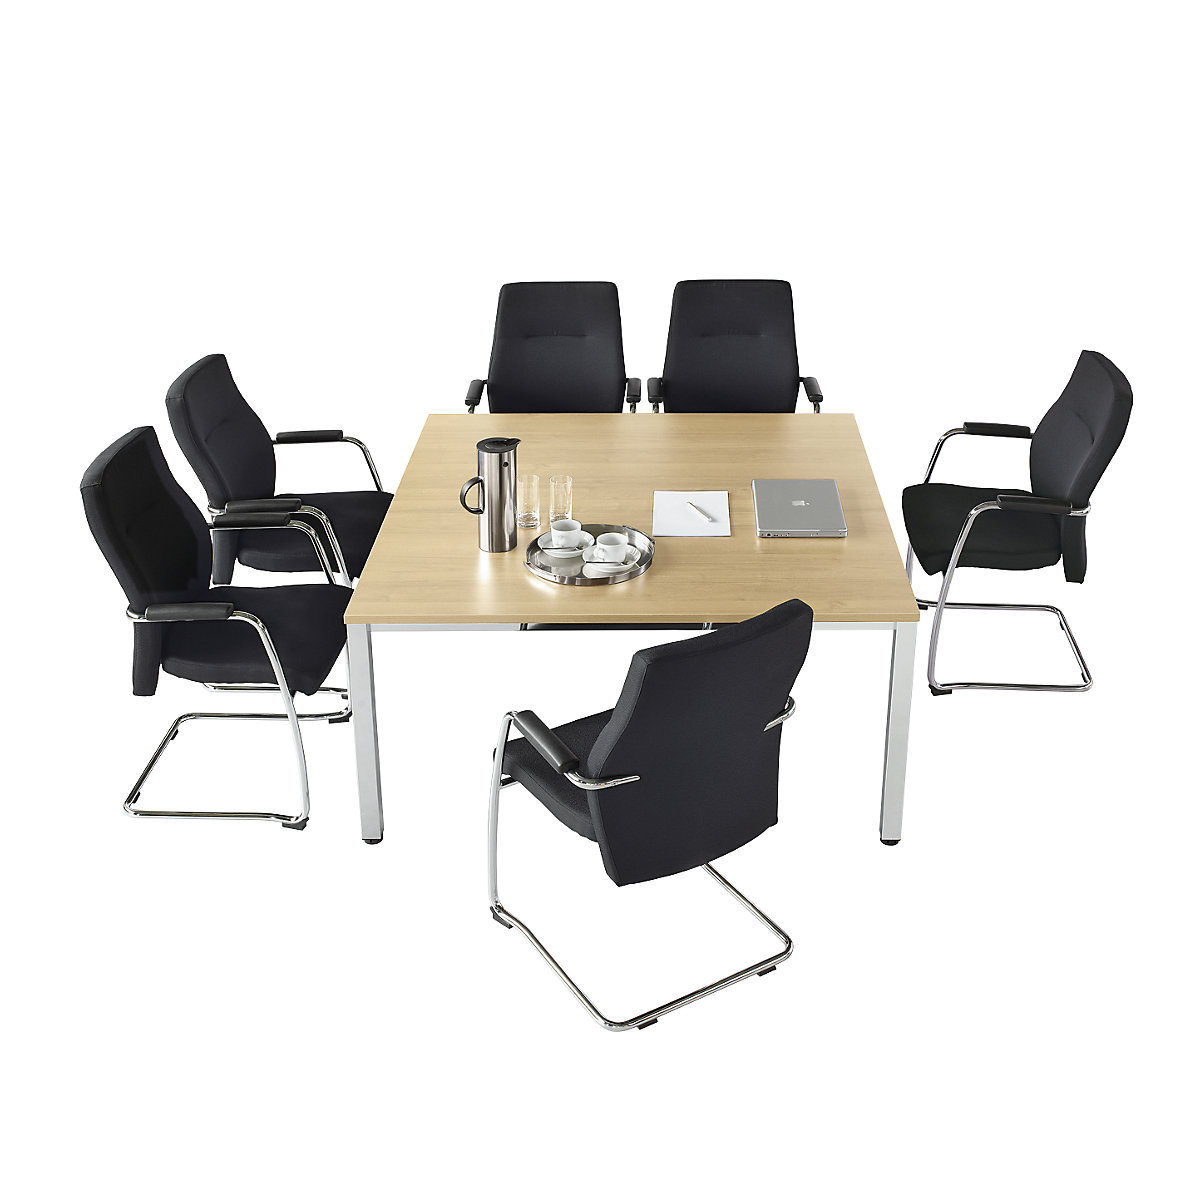 Conference table, square